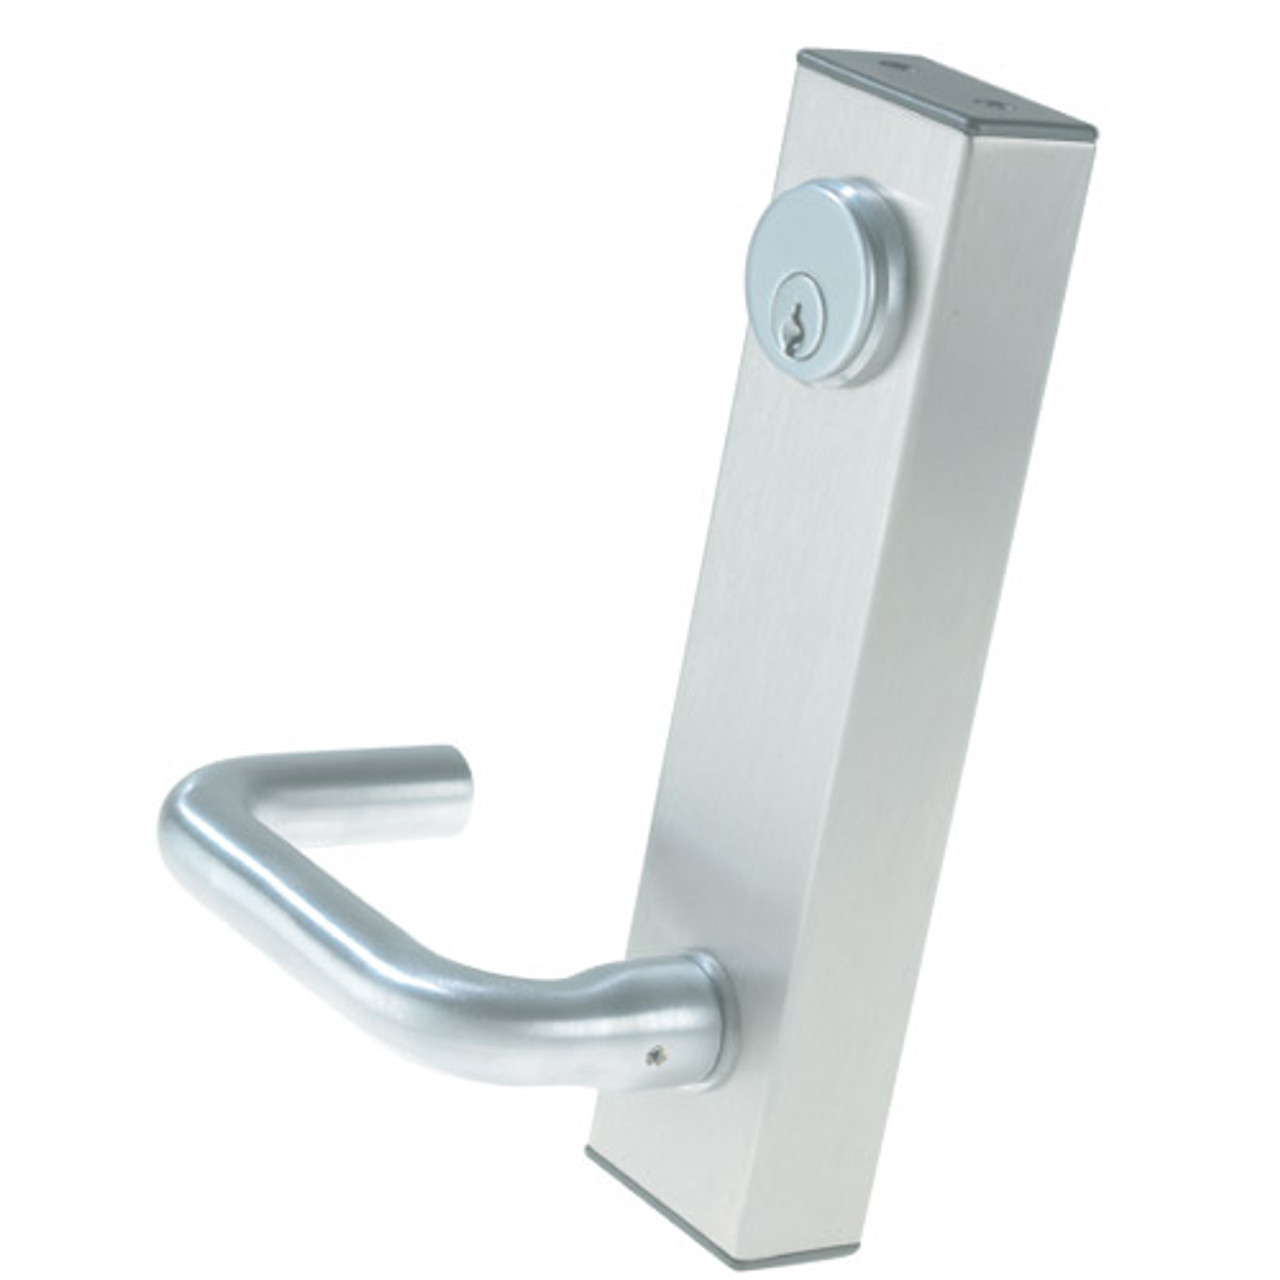 3080E-02-0-31-55 US32 Adams Rite Electrified Entry Trim with Round Lever in Bright Stainless Finish